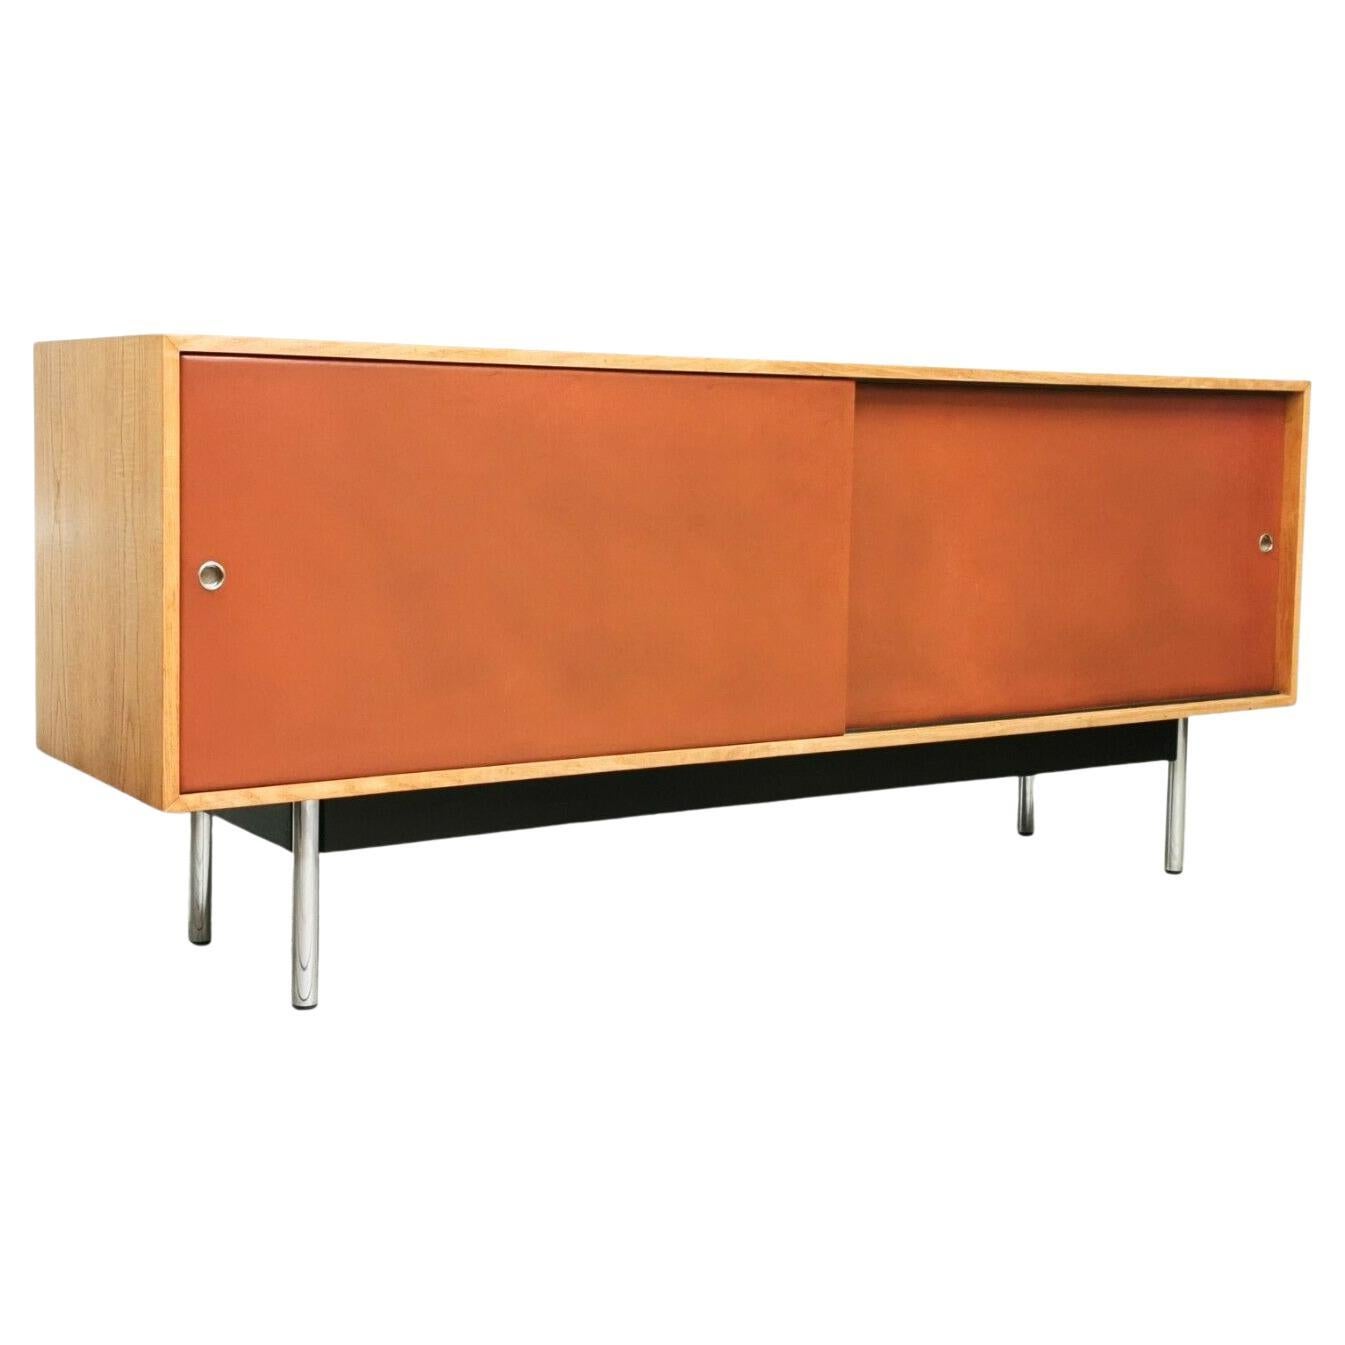 Hille mid century sideboard

A mid century sideboard designed by Robin Day for Hille. Scarcely seen sideboard with a blonde oak carcass and cognac covered leather sliding doors. 

Robin Day is Britain’s most renowned furniture designer. Having